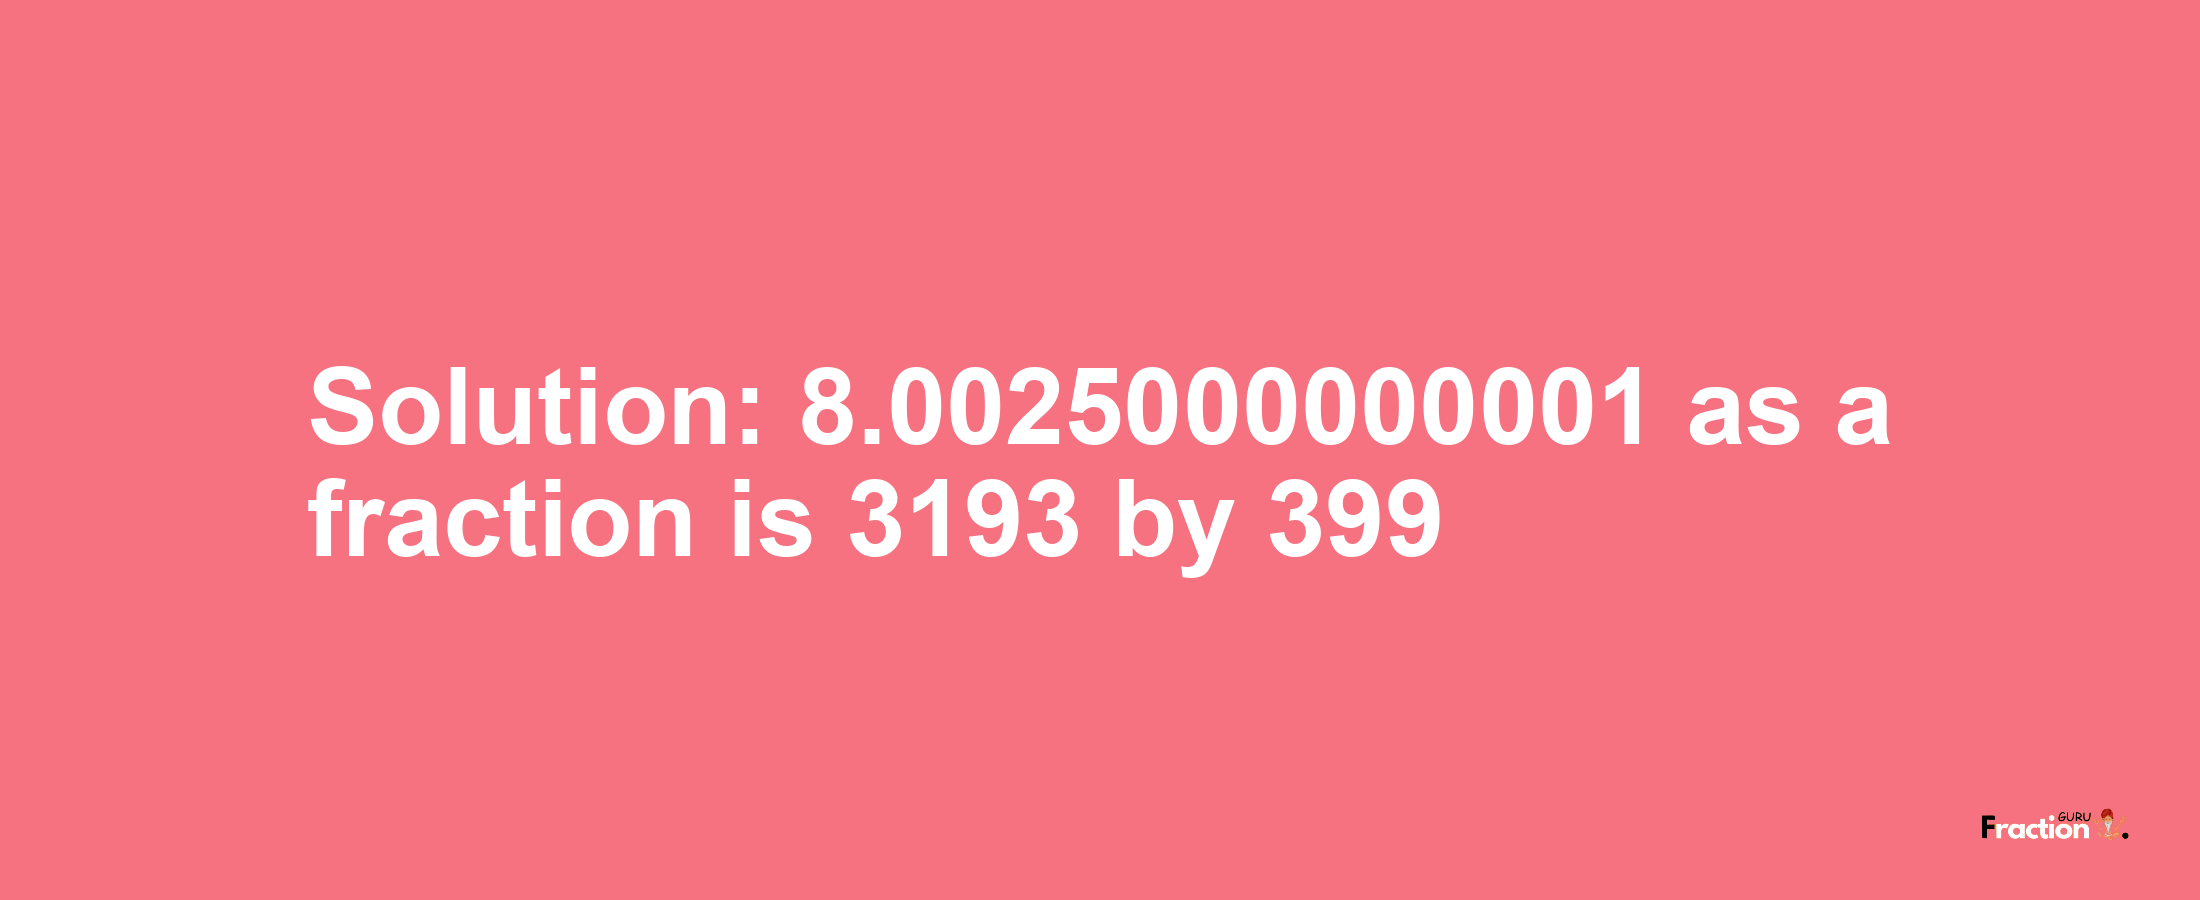 Solution:8.0025000000001 as a fraction is 3193/399